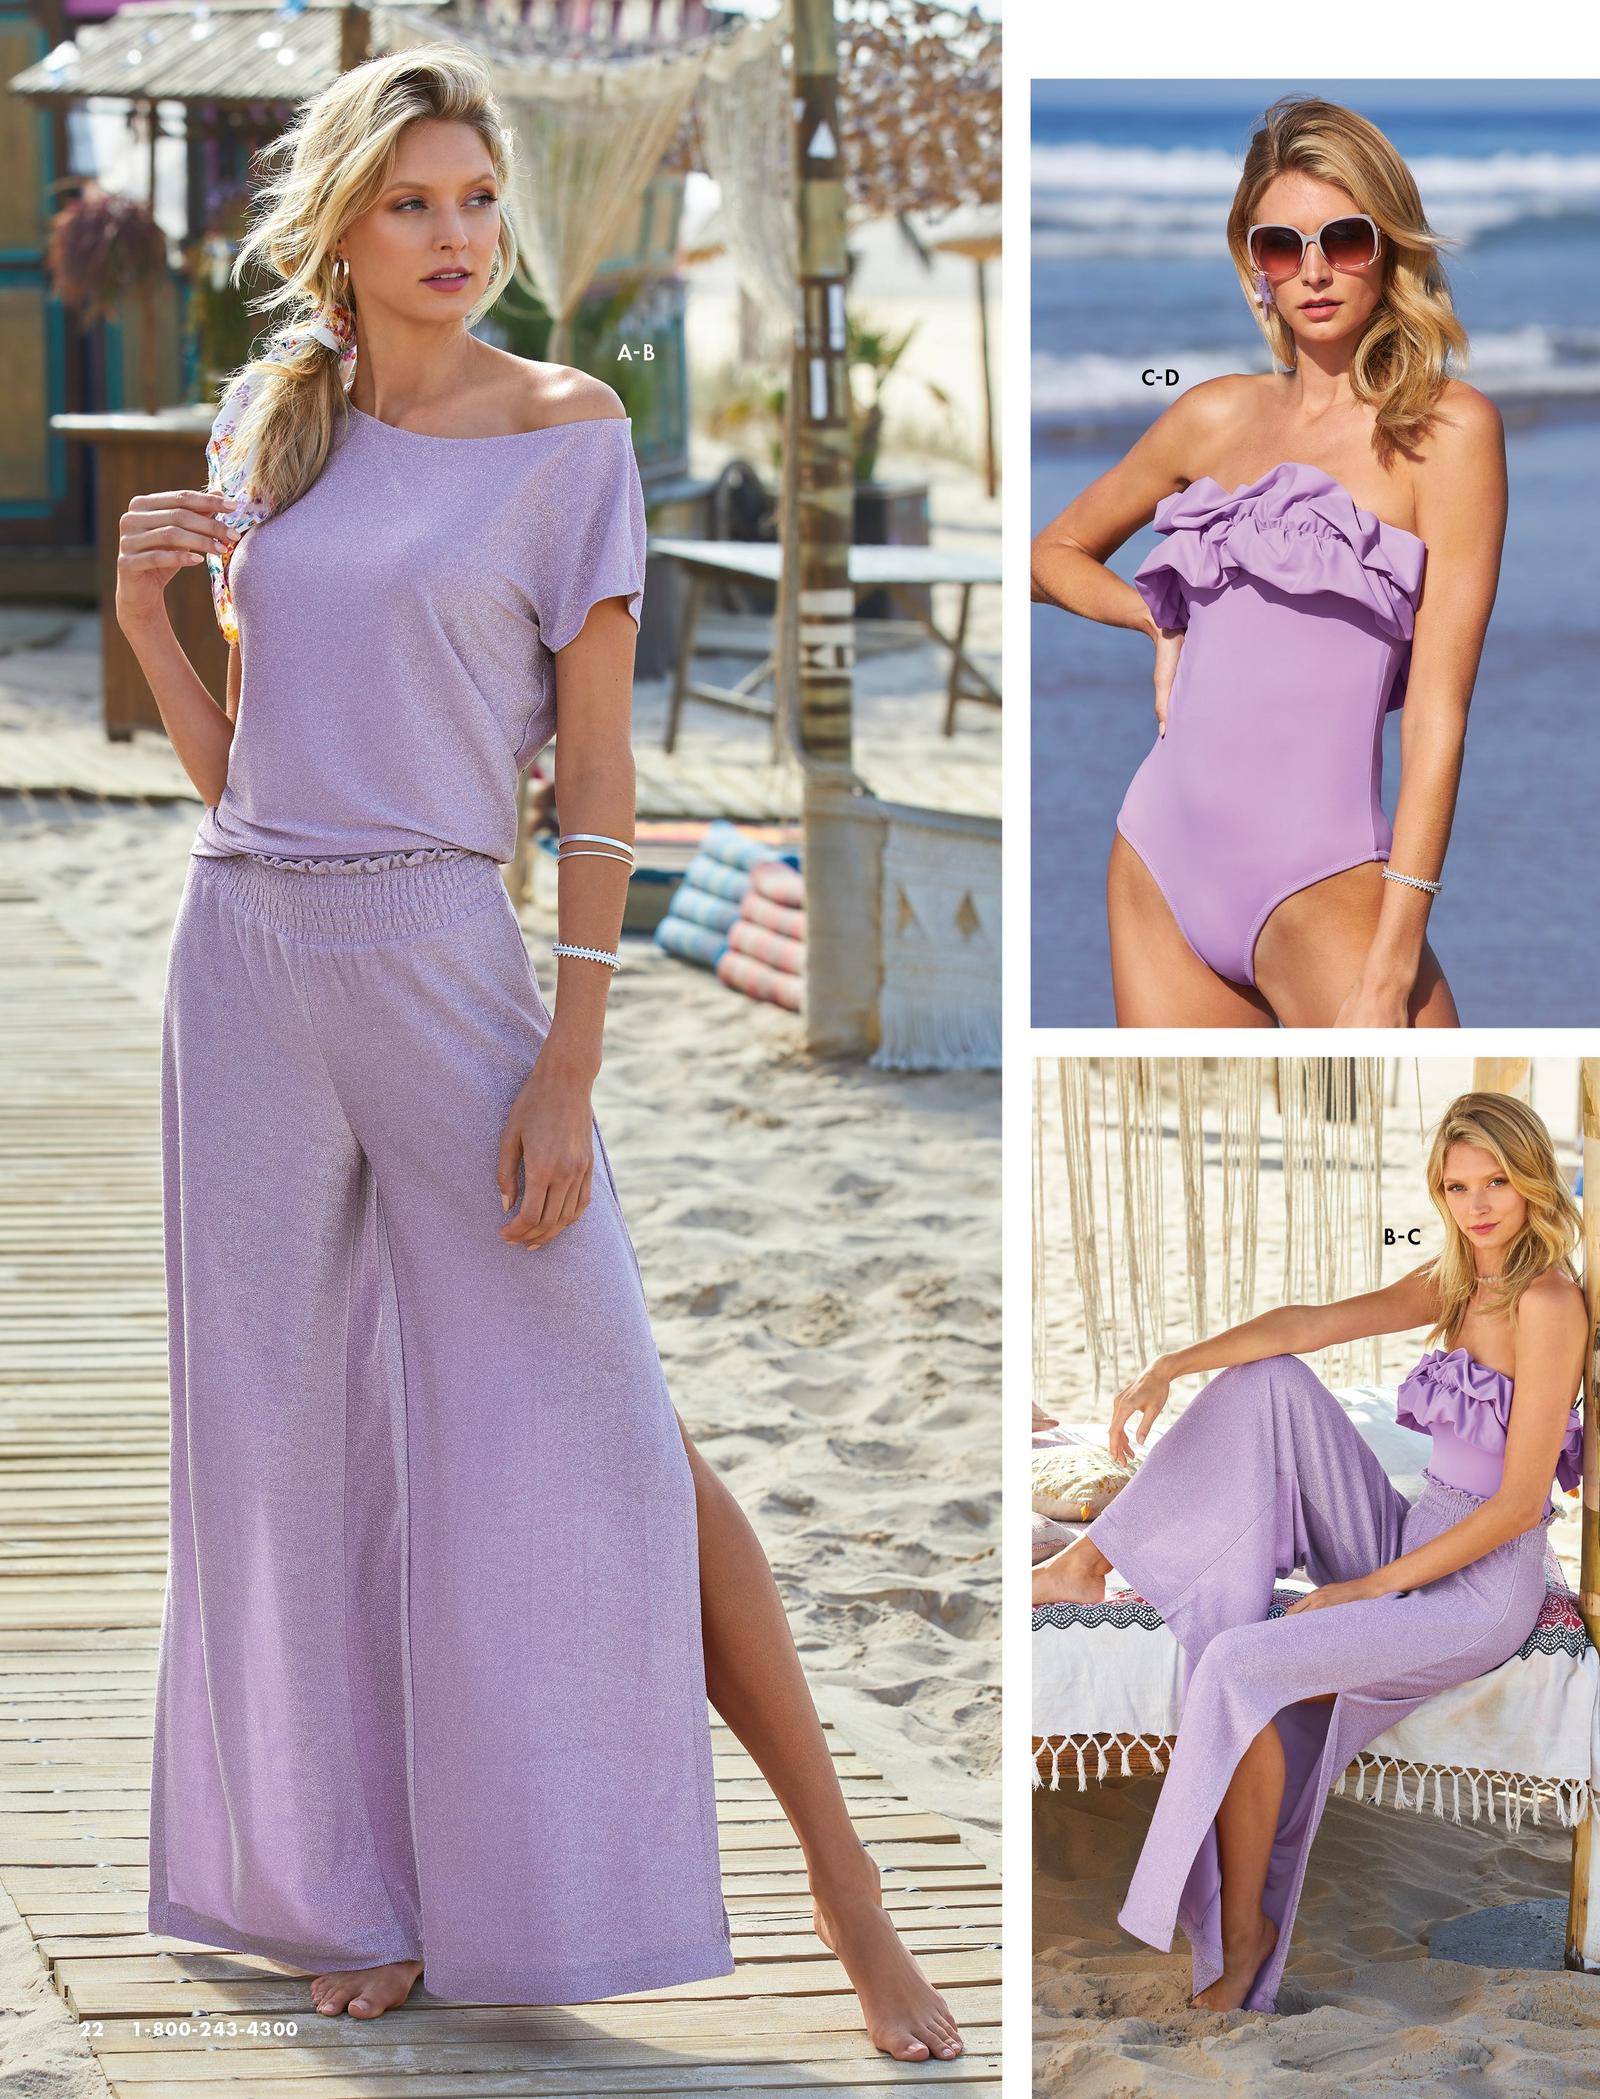 left model wearing a lavender slouchy tee shirt and lavender shimmery palazzo pants. top right model wearing a strapless lavender ruffle one piece swimsuit and sunglasses. bottom right model wearing a lavender one piece ruffle swimsuit and lavender palazzo pants.